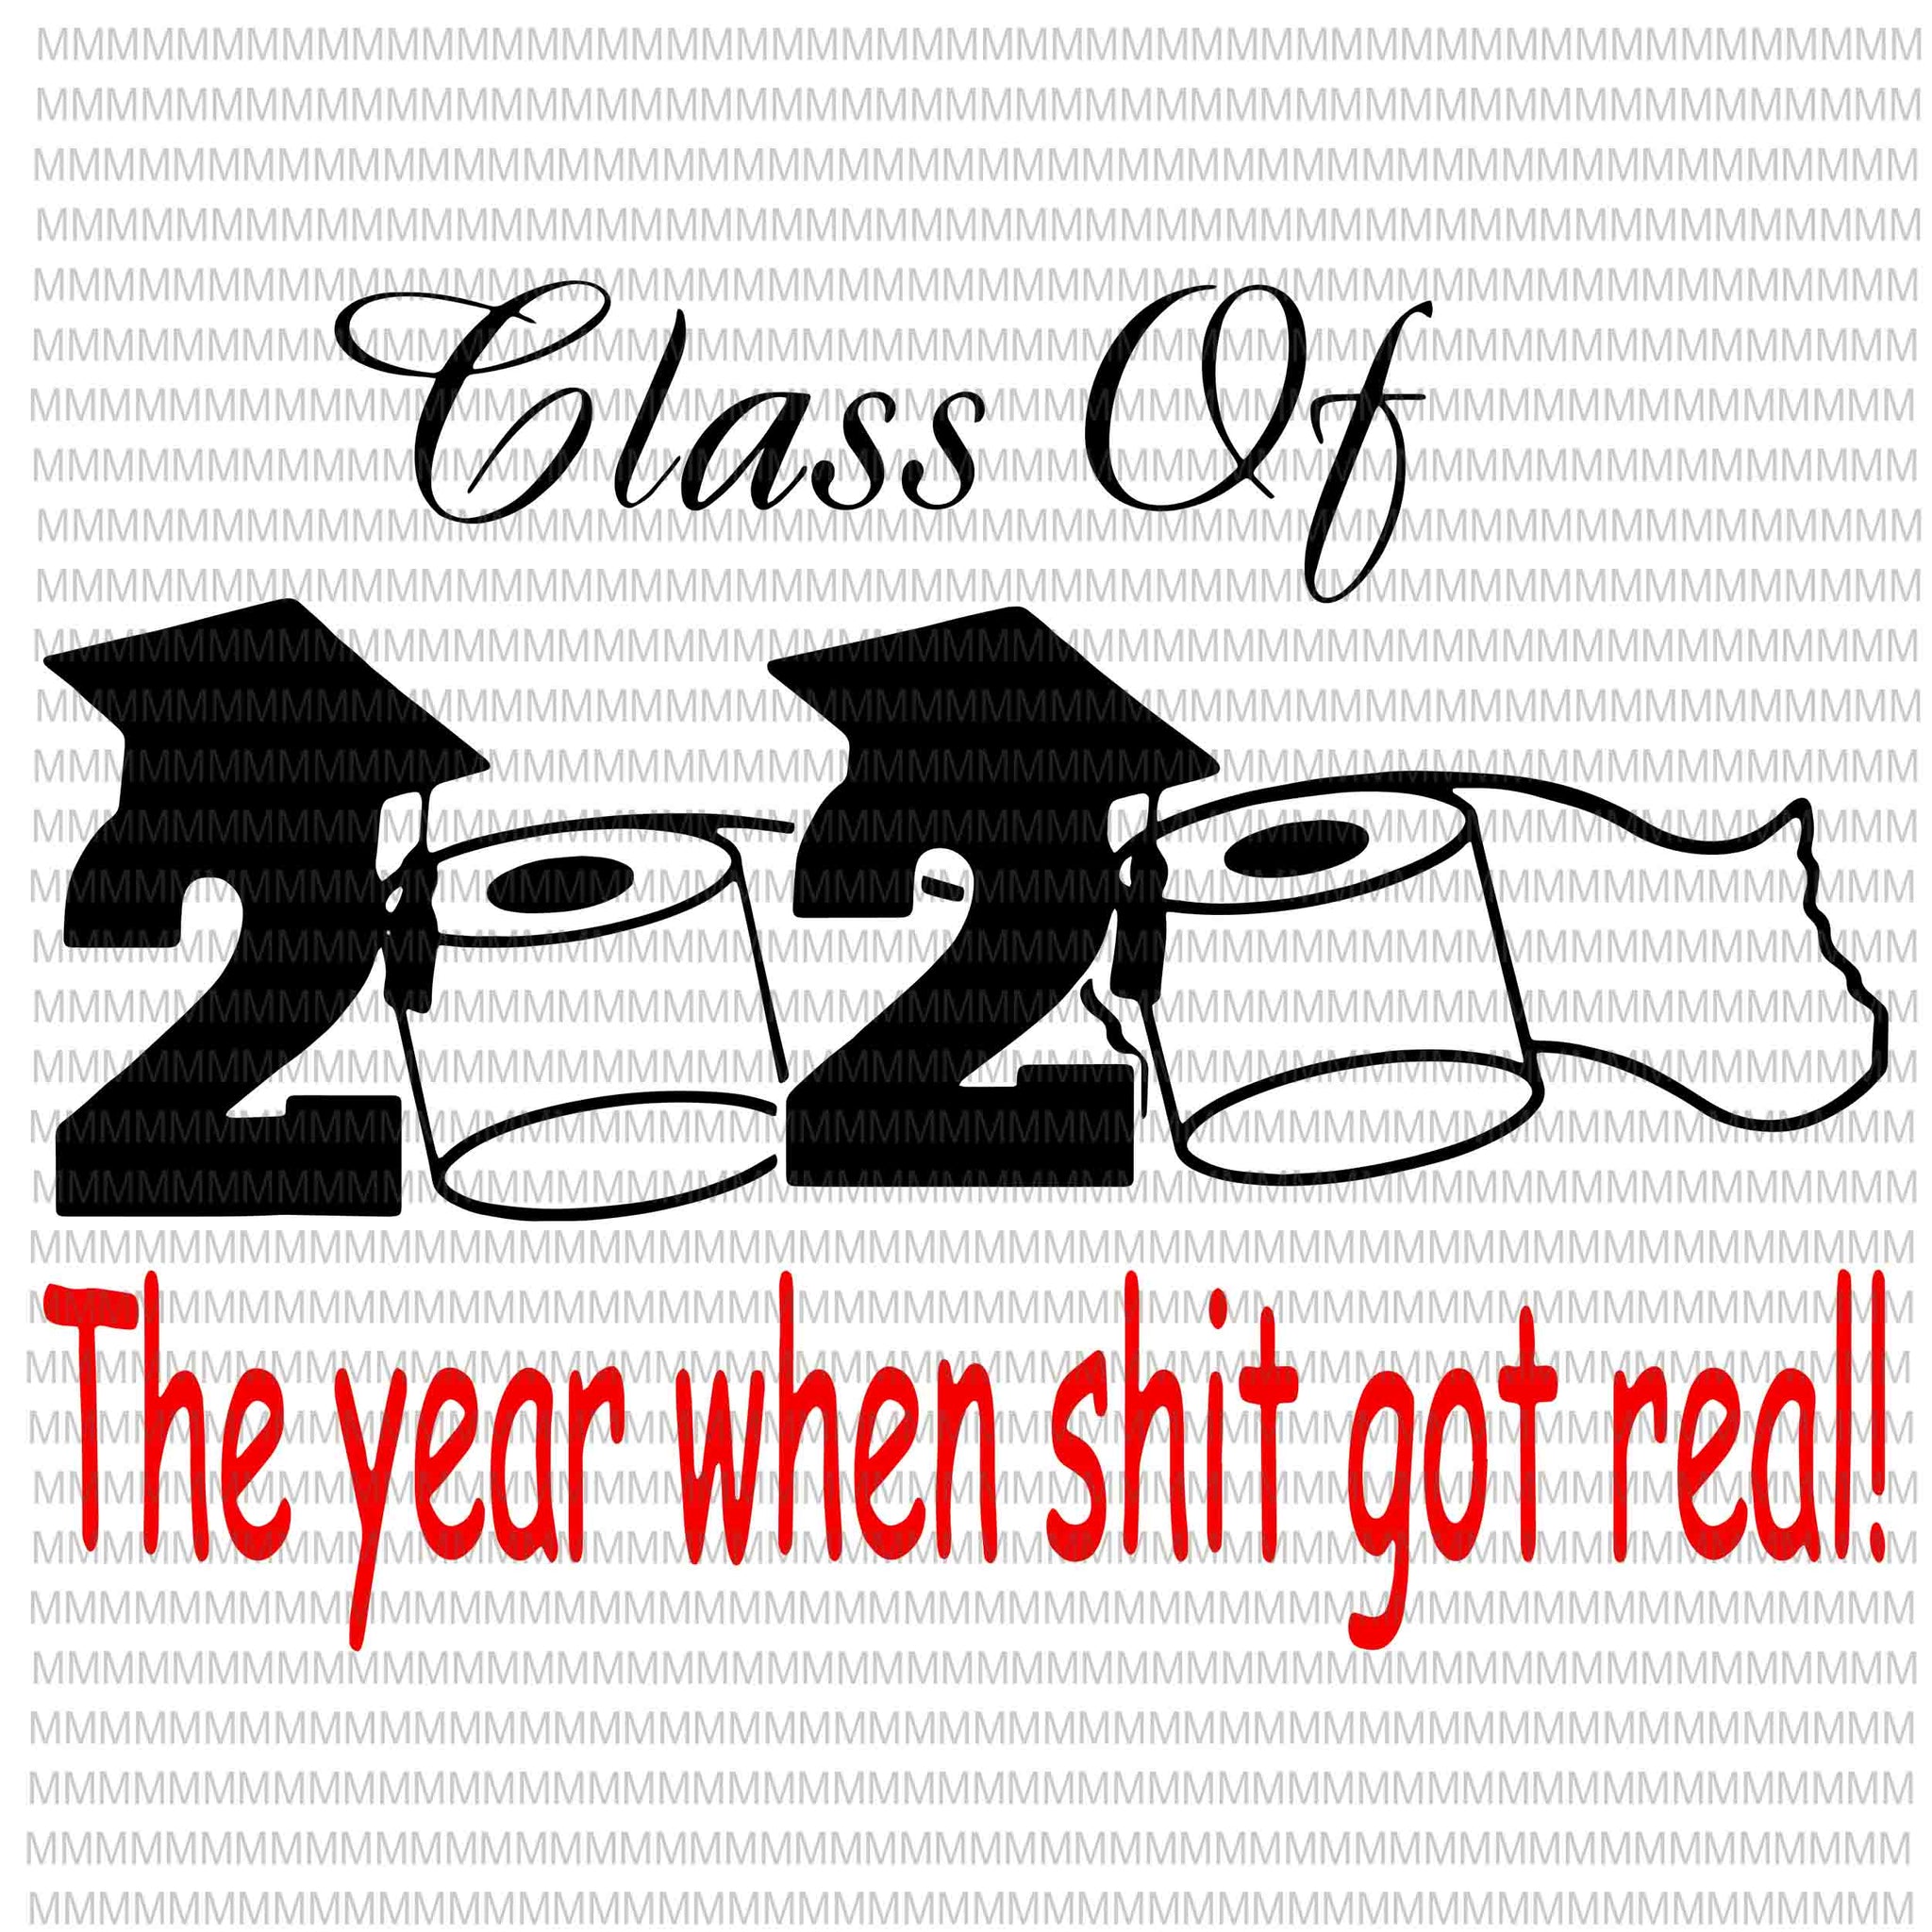 Class of 2020 The Year When Shit Got Real, Graduation svg, funny Graduation quote